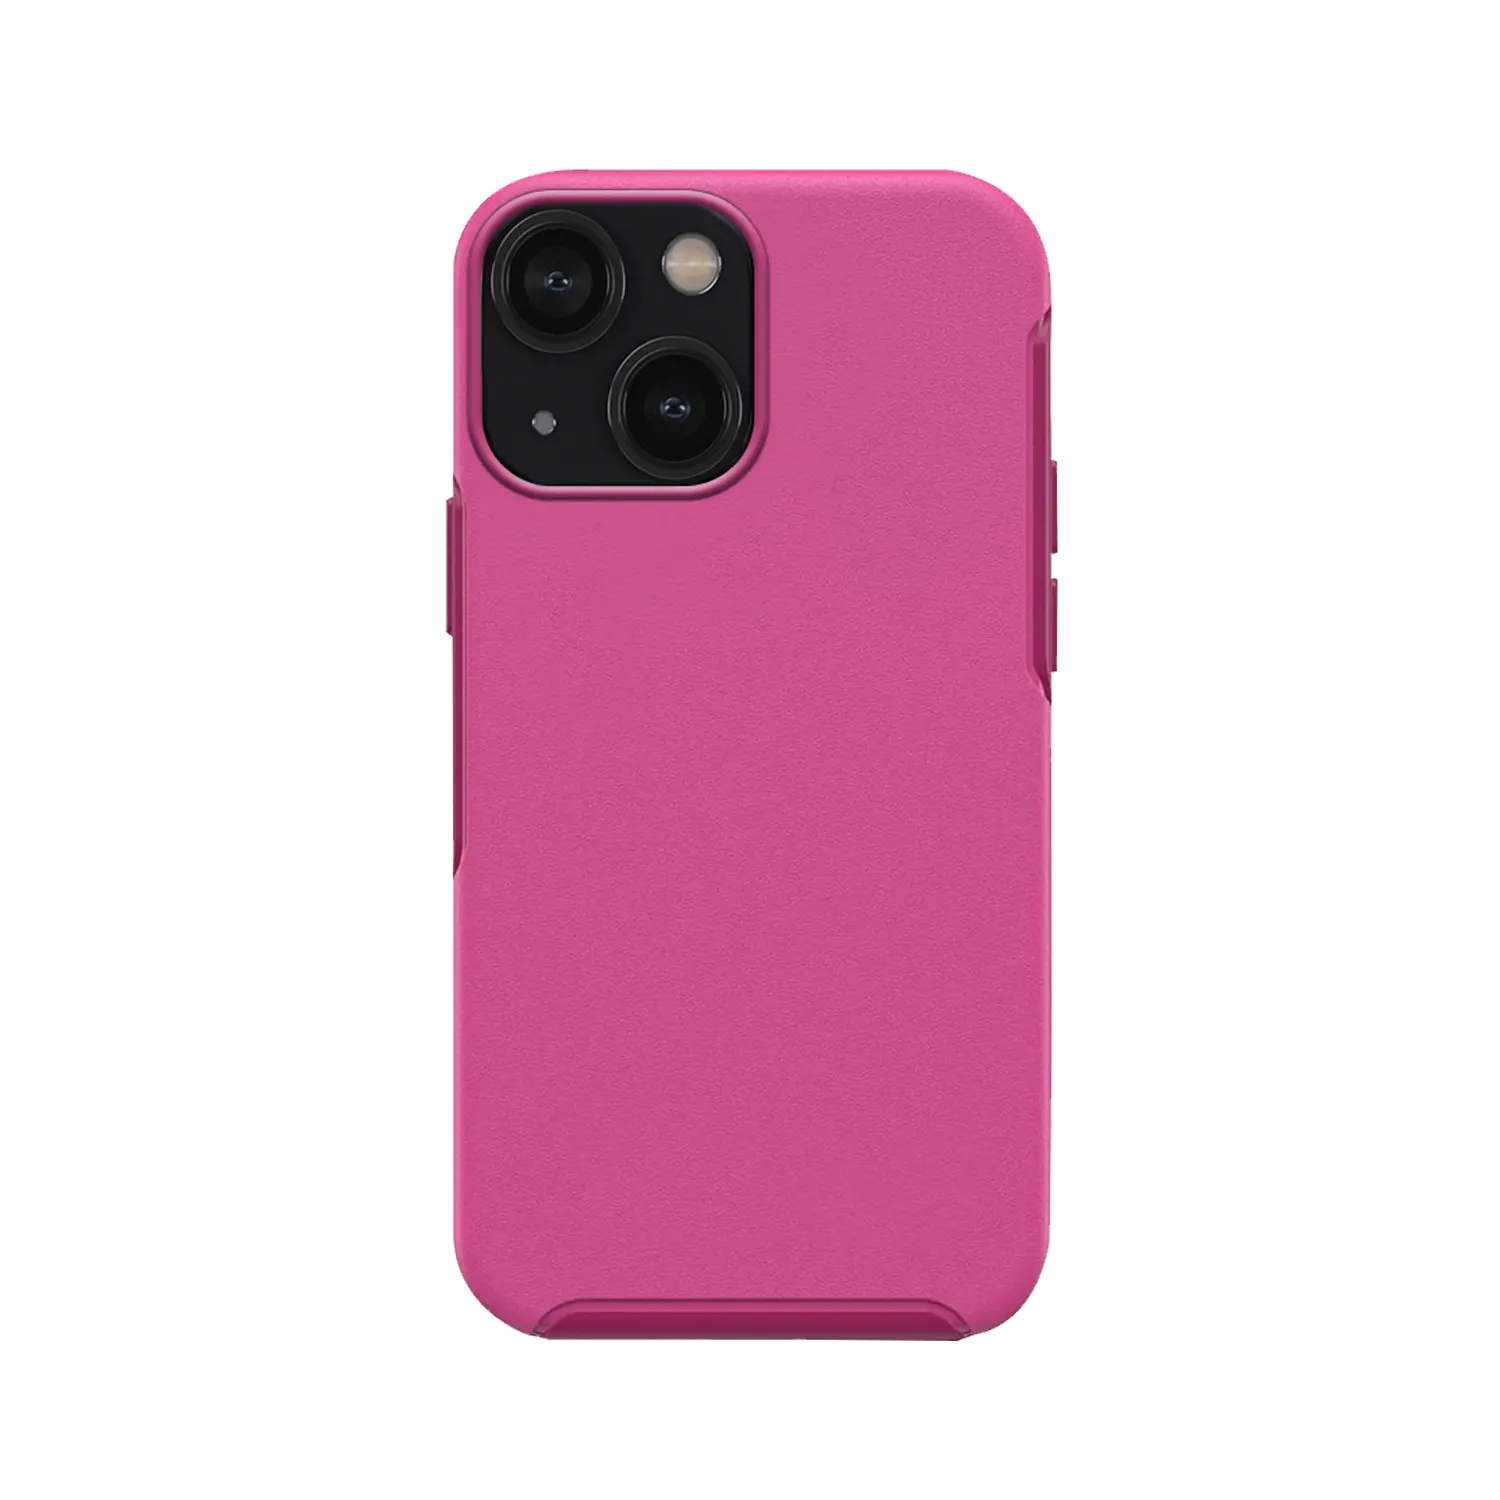 symmetry iphone 12 case pink